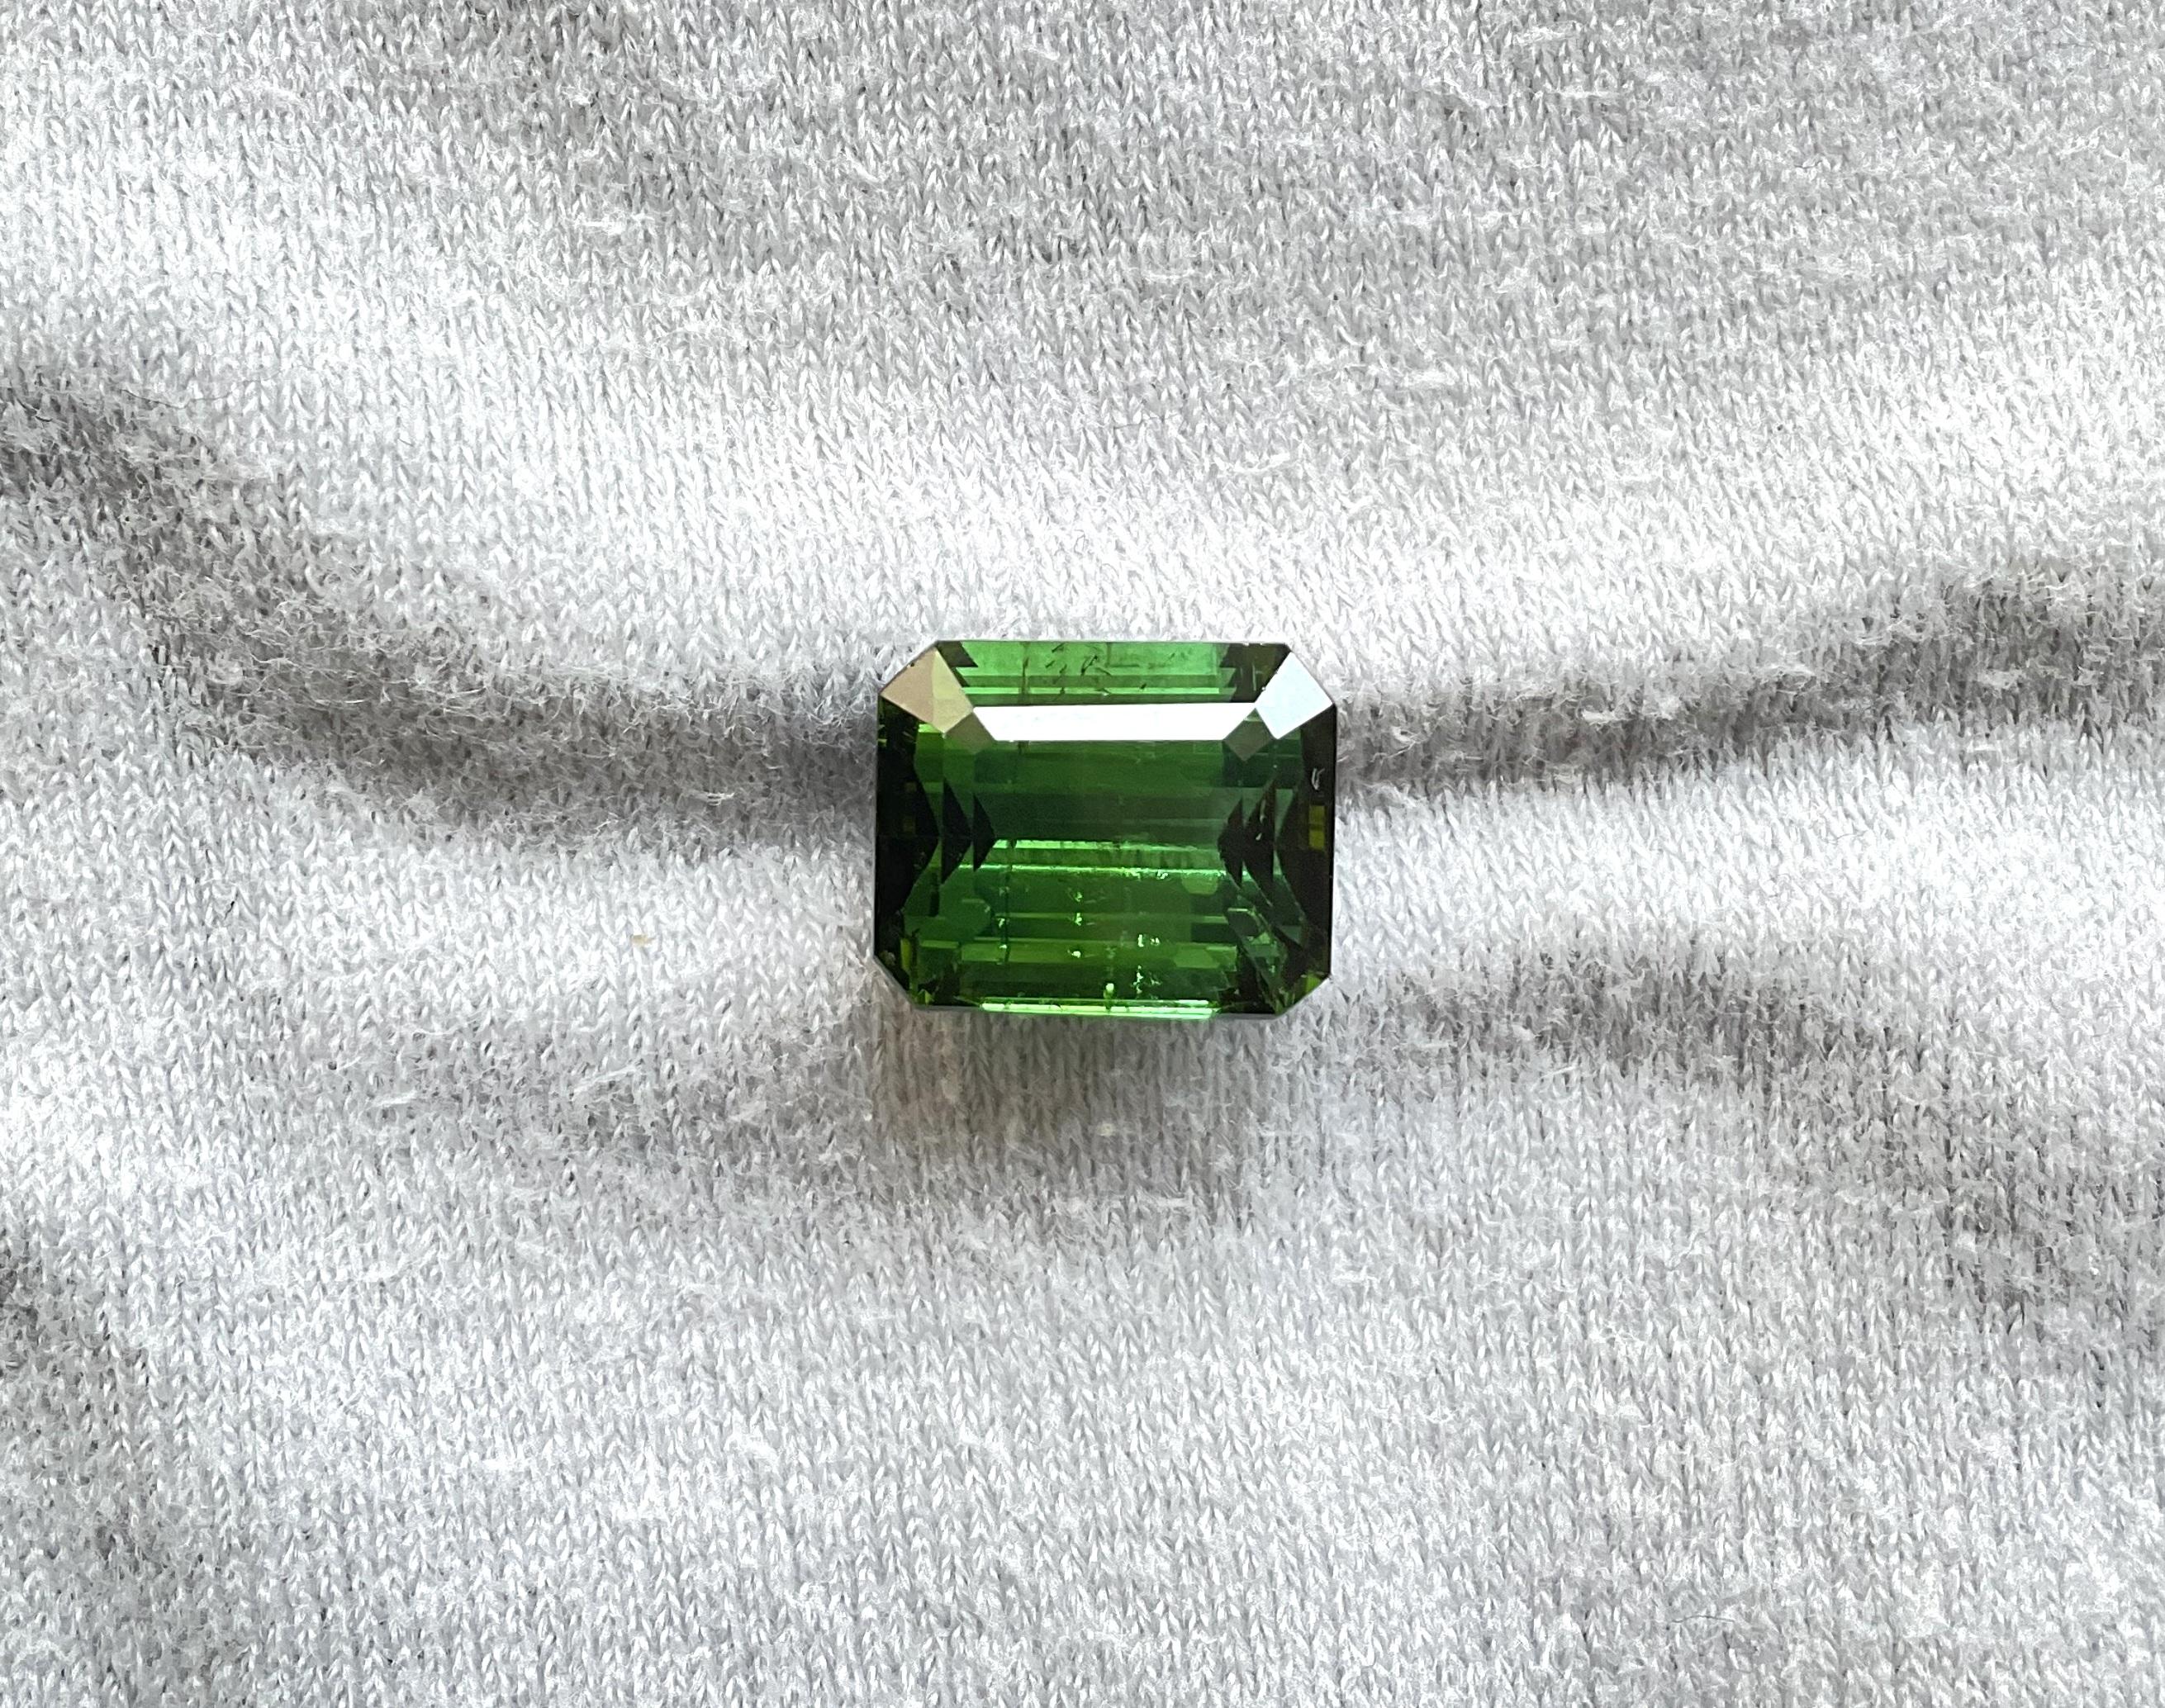 7.52 carats Nigeria green tourmaline Top Quality Octagon Cut stone natural Gem In New Condition For Sale In Jaipur, RJ